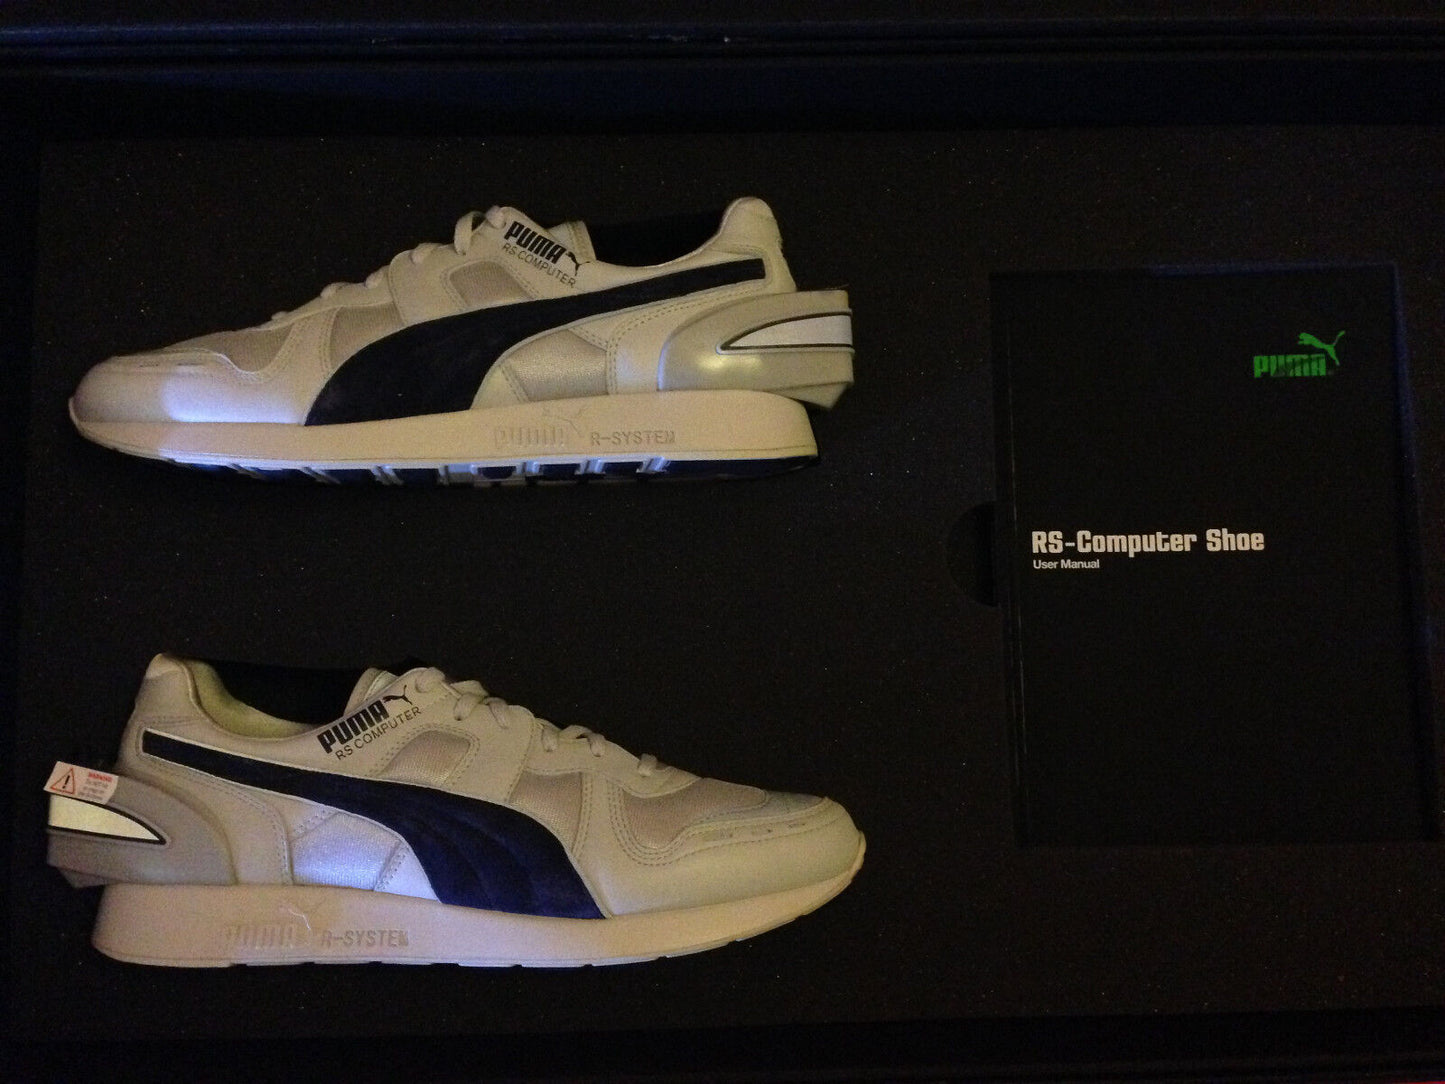 Puma RS Computer Shoe 1986-2018 #62 of 86 pairs worldwide new US 10 UK 9 EUR 43